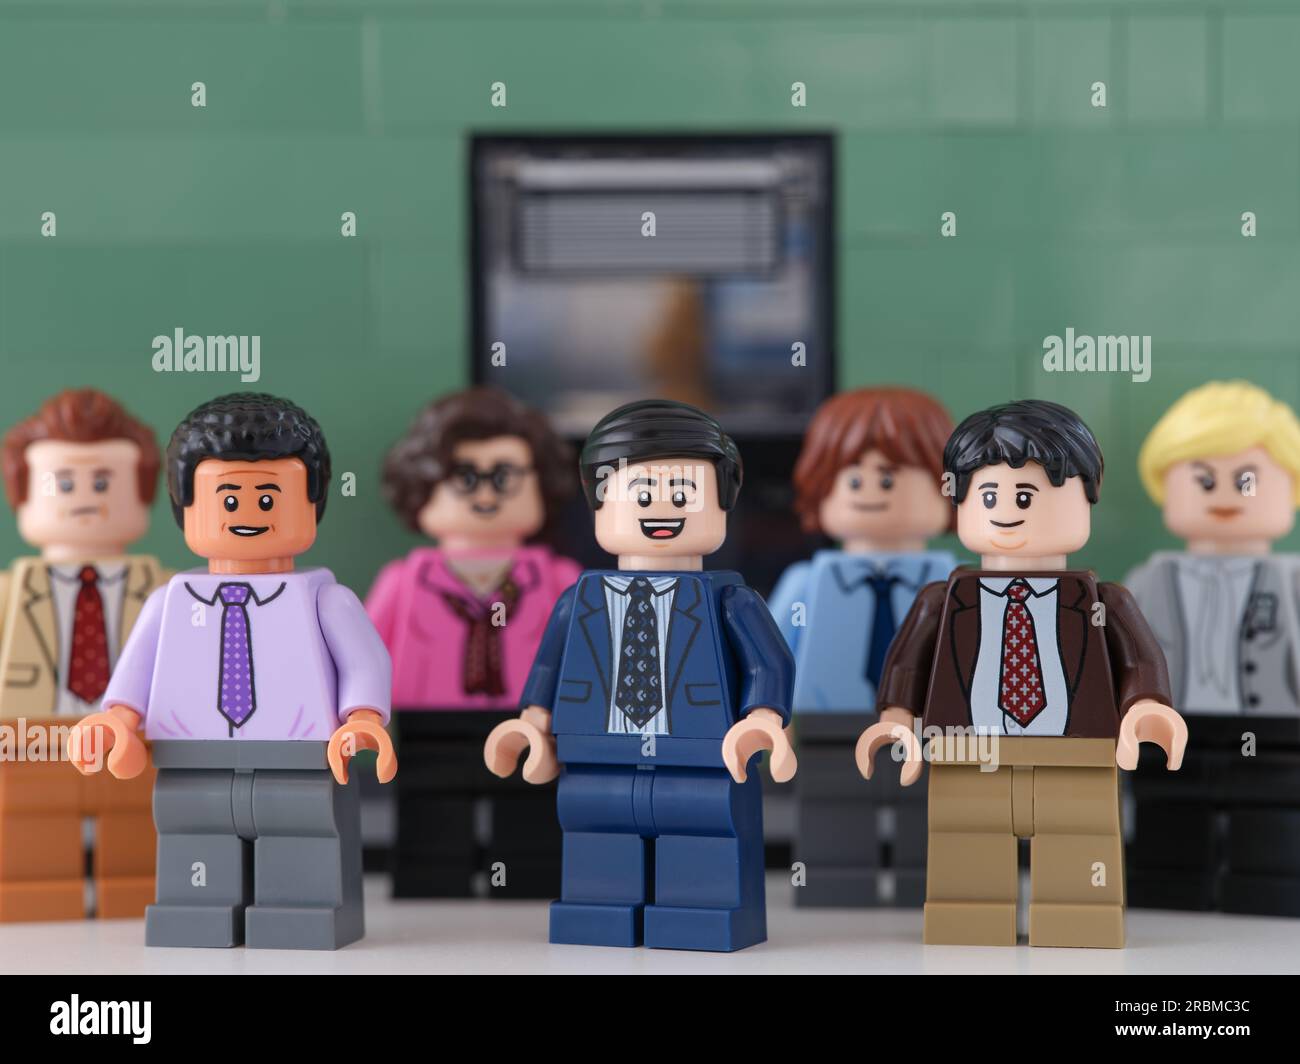 Tambov, Russian Federation - July 01, 2023 Lego businesspeople minifigures standing and looking into their successful future. Stock Photo